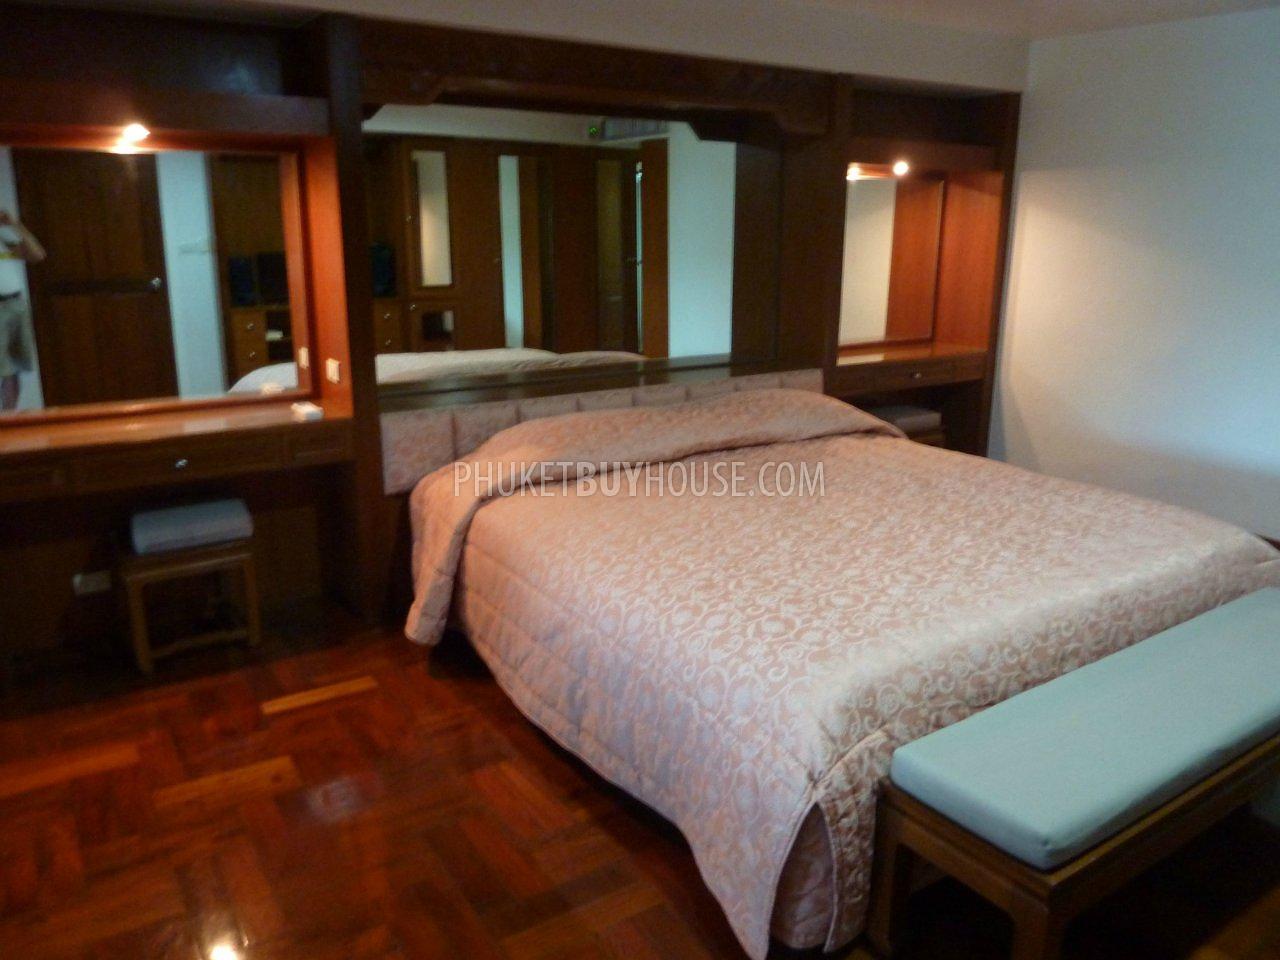 NAI2456: Freehold: Very nice 2 bedr. apartment (top floor), fully furnished, near beautiful Nai Harn Beach. Фото #20